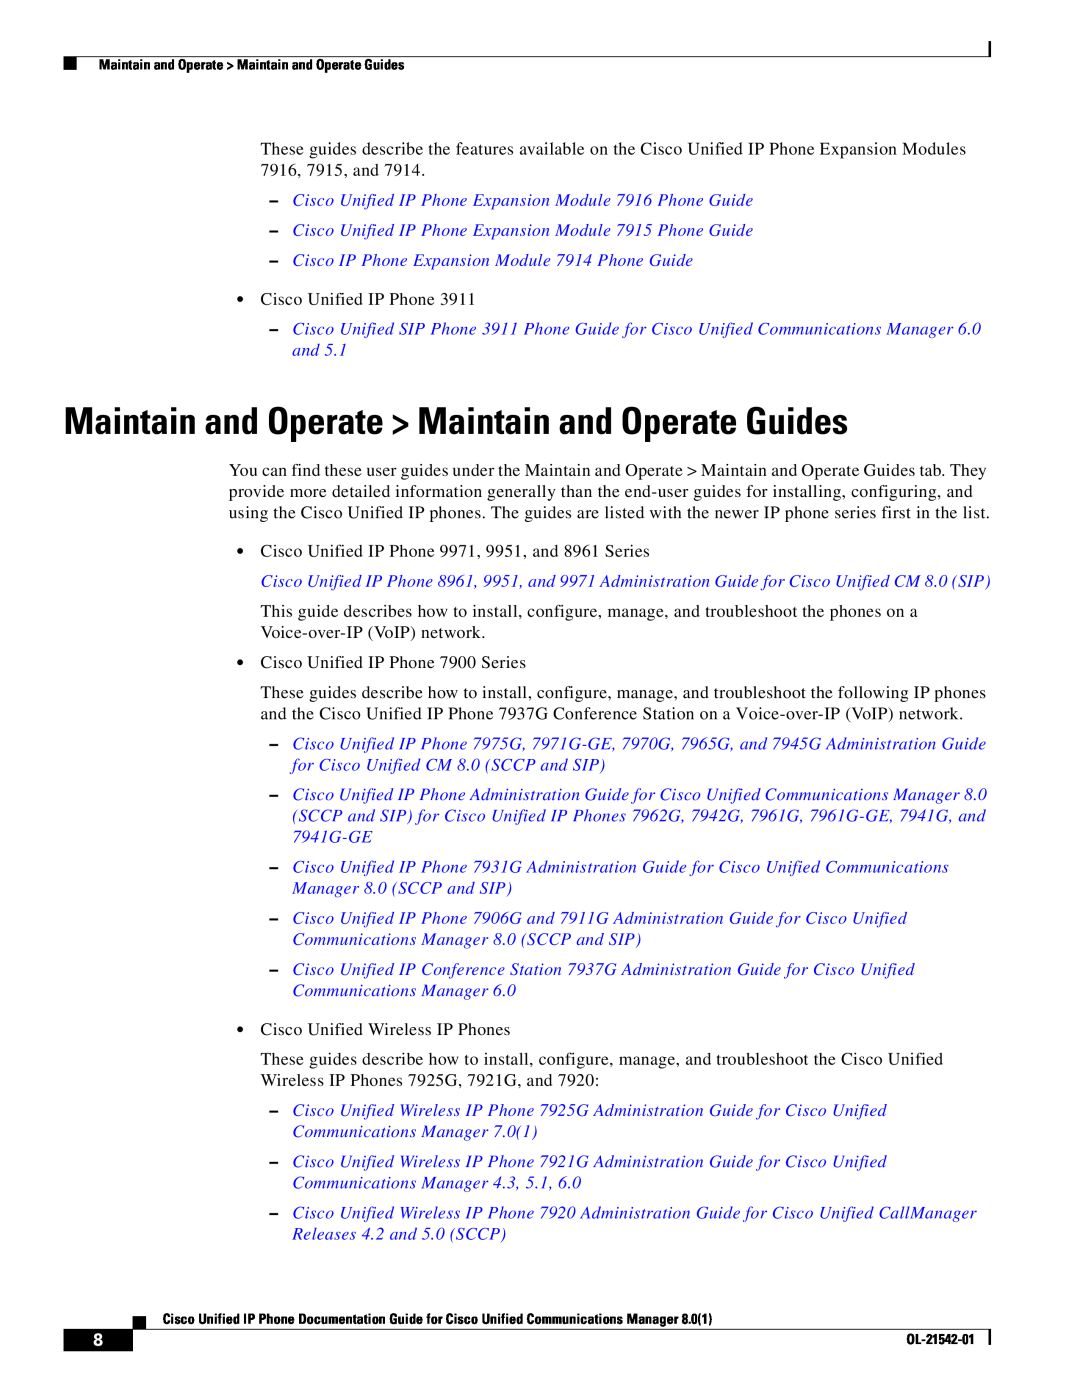 Cisco Systems 9900, 3900, 6900 manual Maintain and Operate Maintain and Operate Guides 